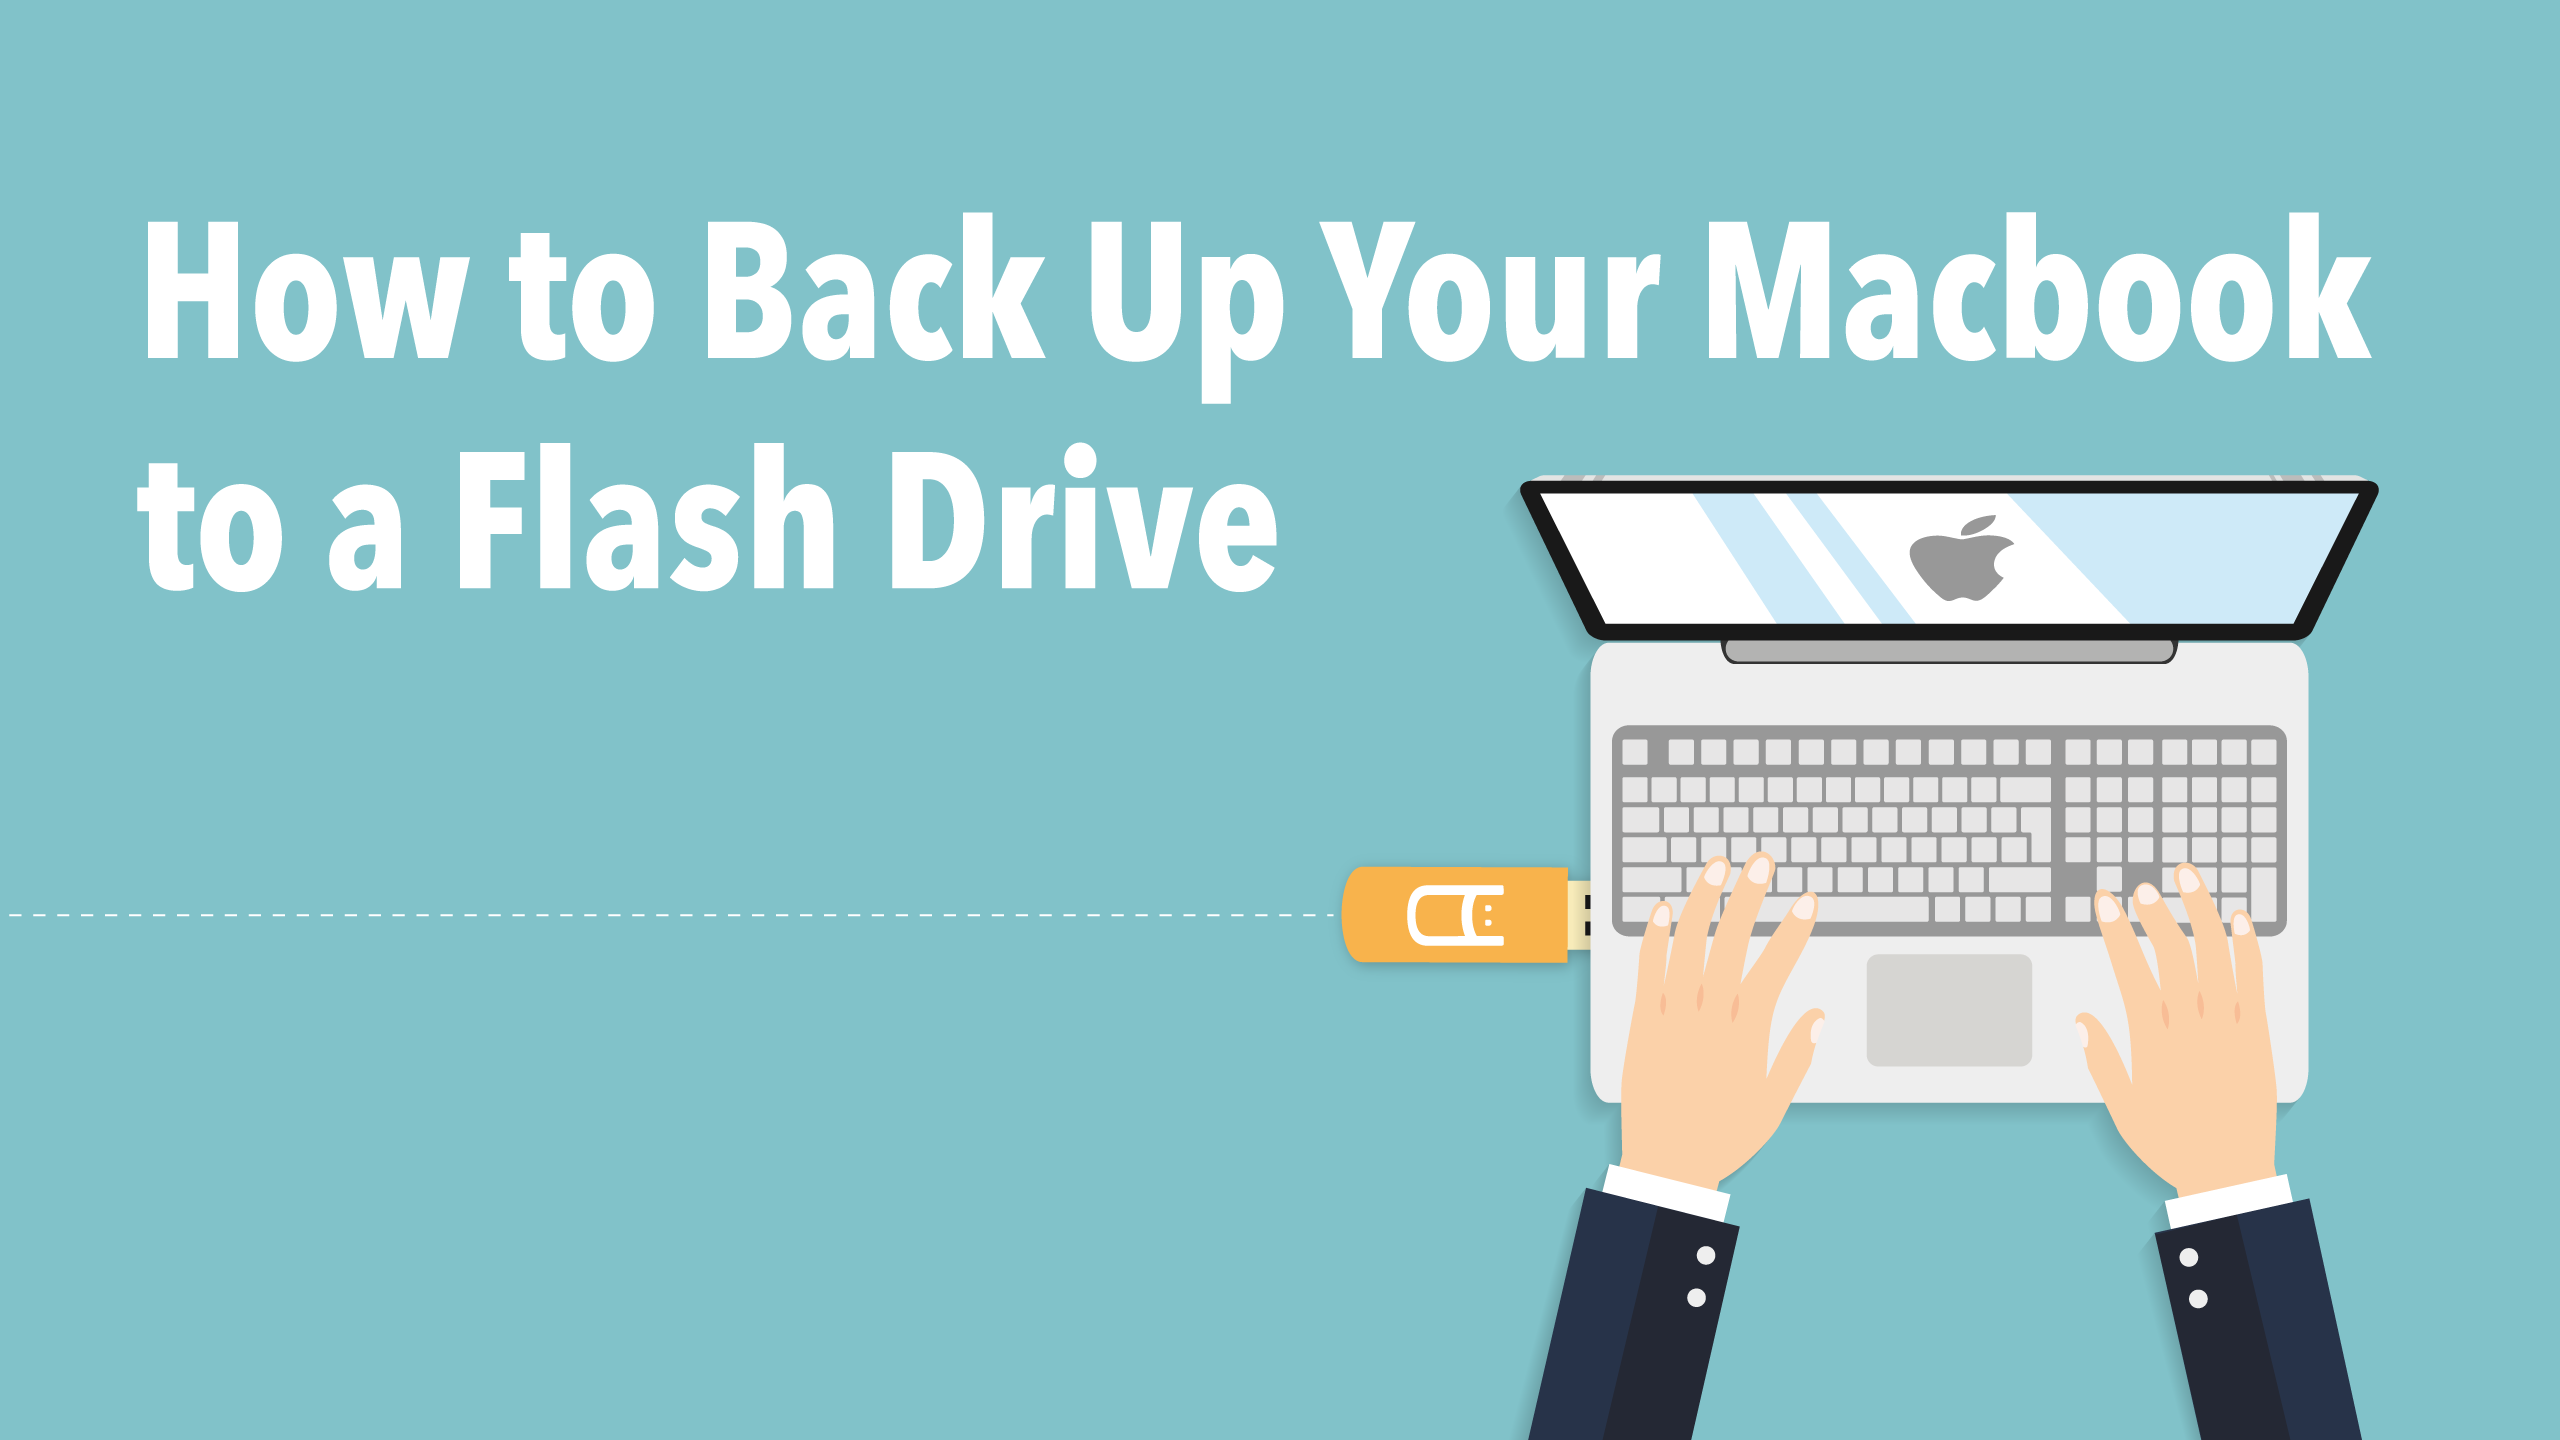 How To Back Up Your MacBook to a Flash Drive